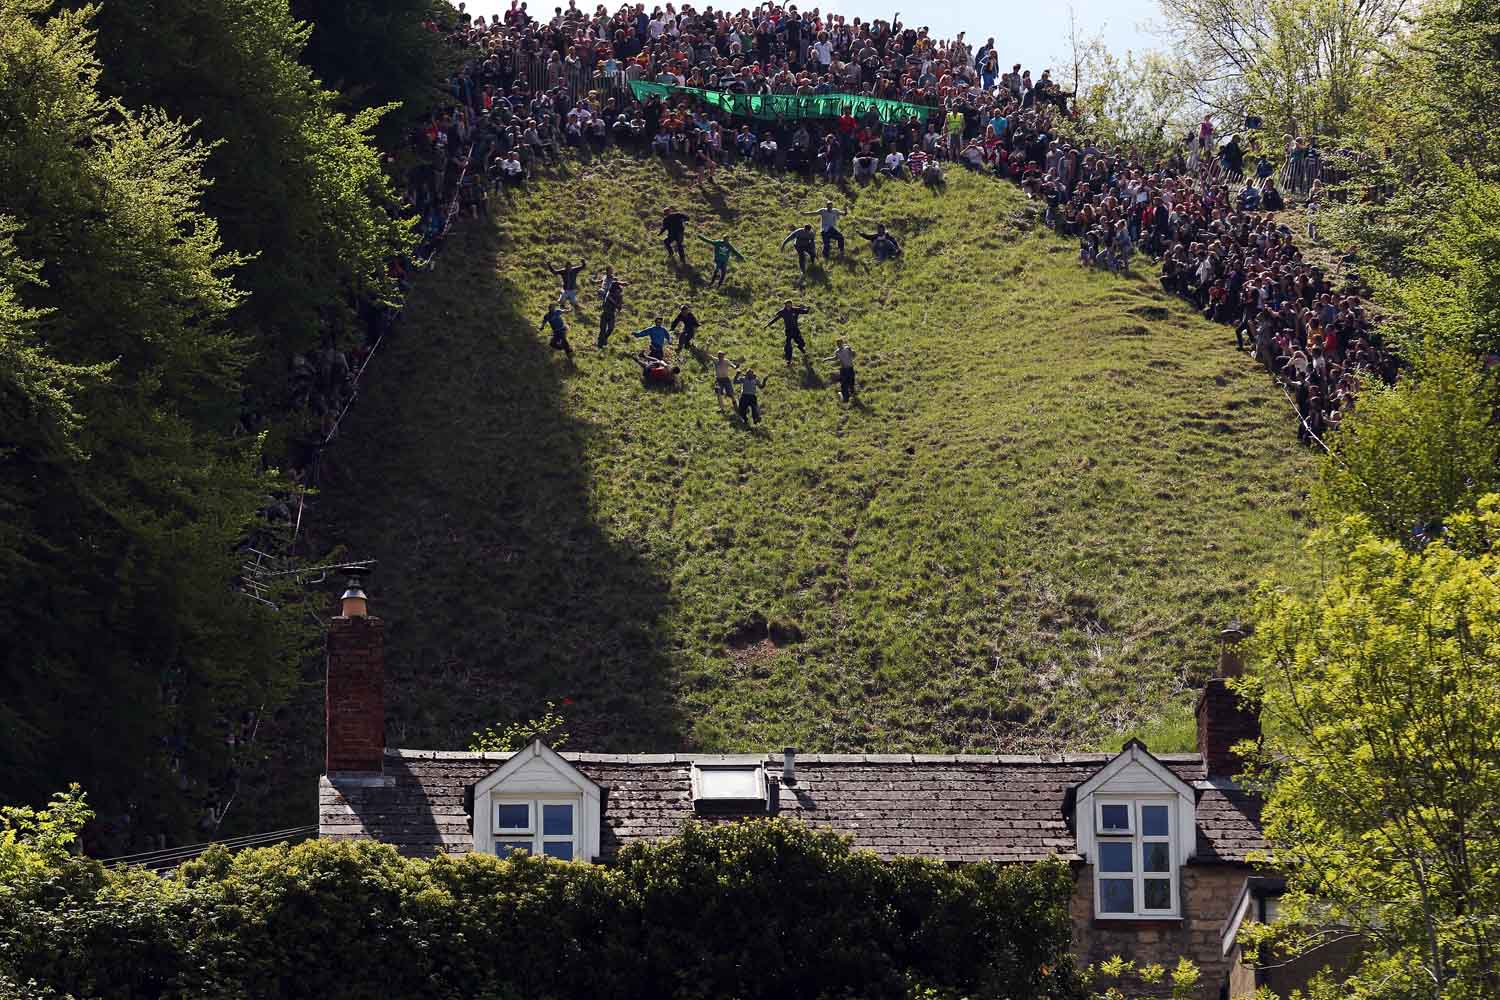 Cooper‚Äôs Hill Hosts The Annual Cheese Rolling And Wake